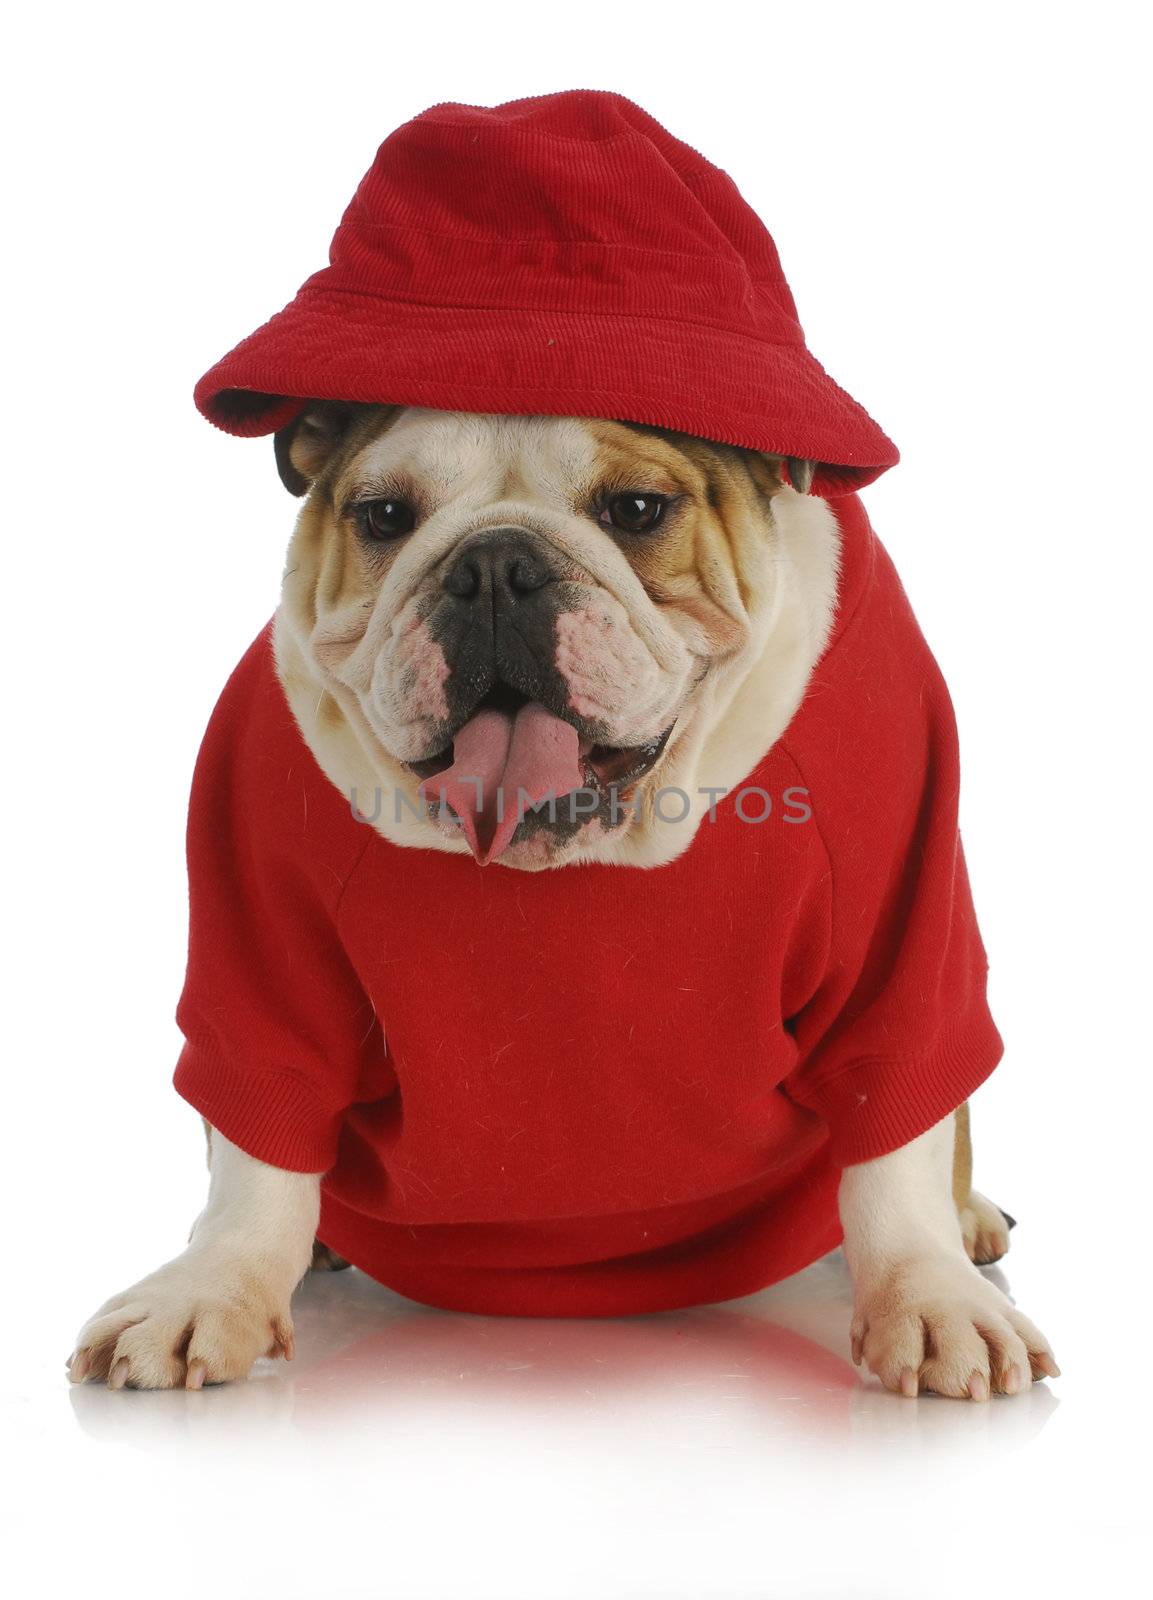 cute dog - english bulldog wearing red had and shirt on white background